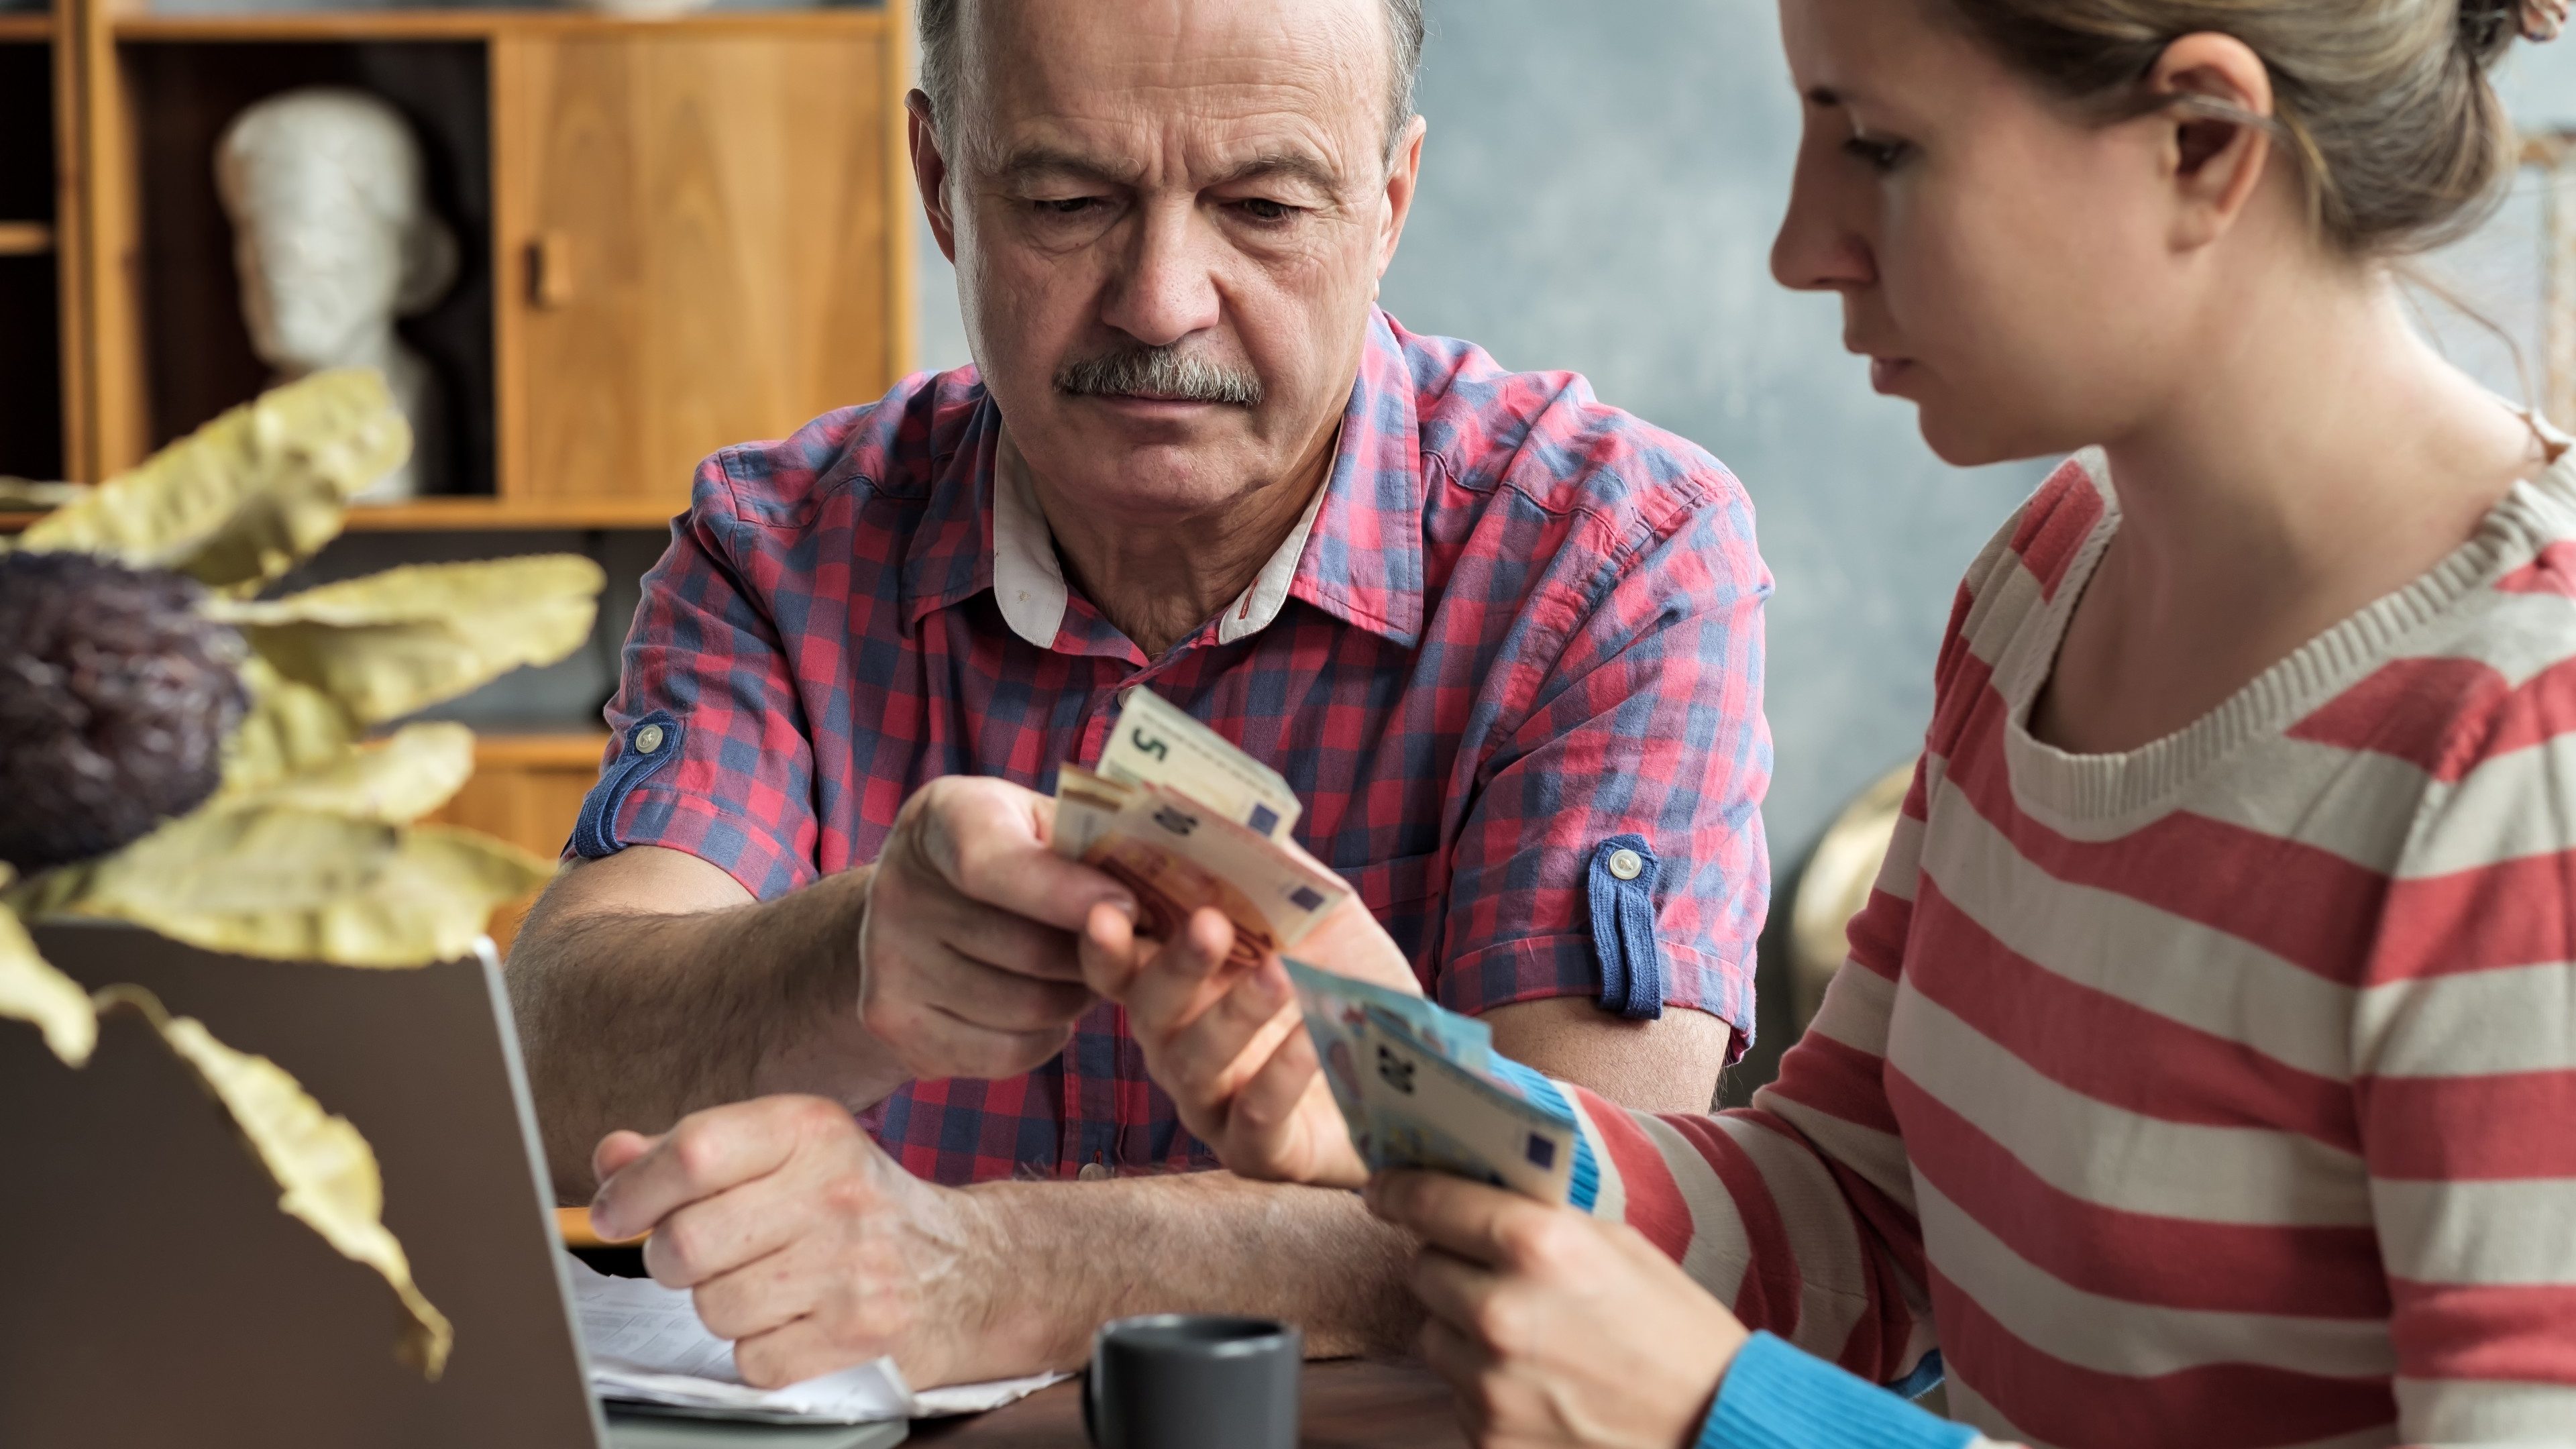 Olderly Spanish man gives his daughter money for a mortgage or student loan. Helping children while retired.